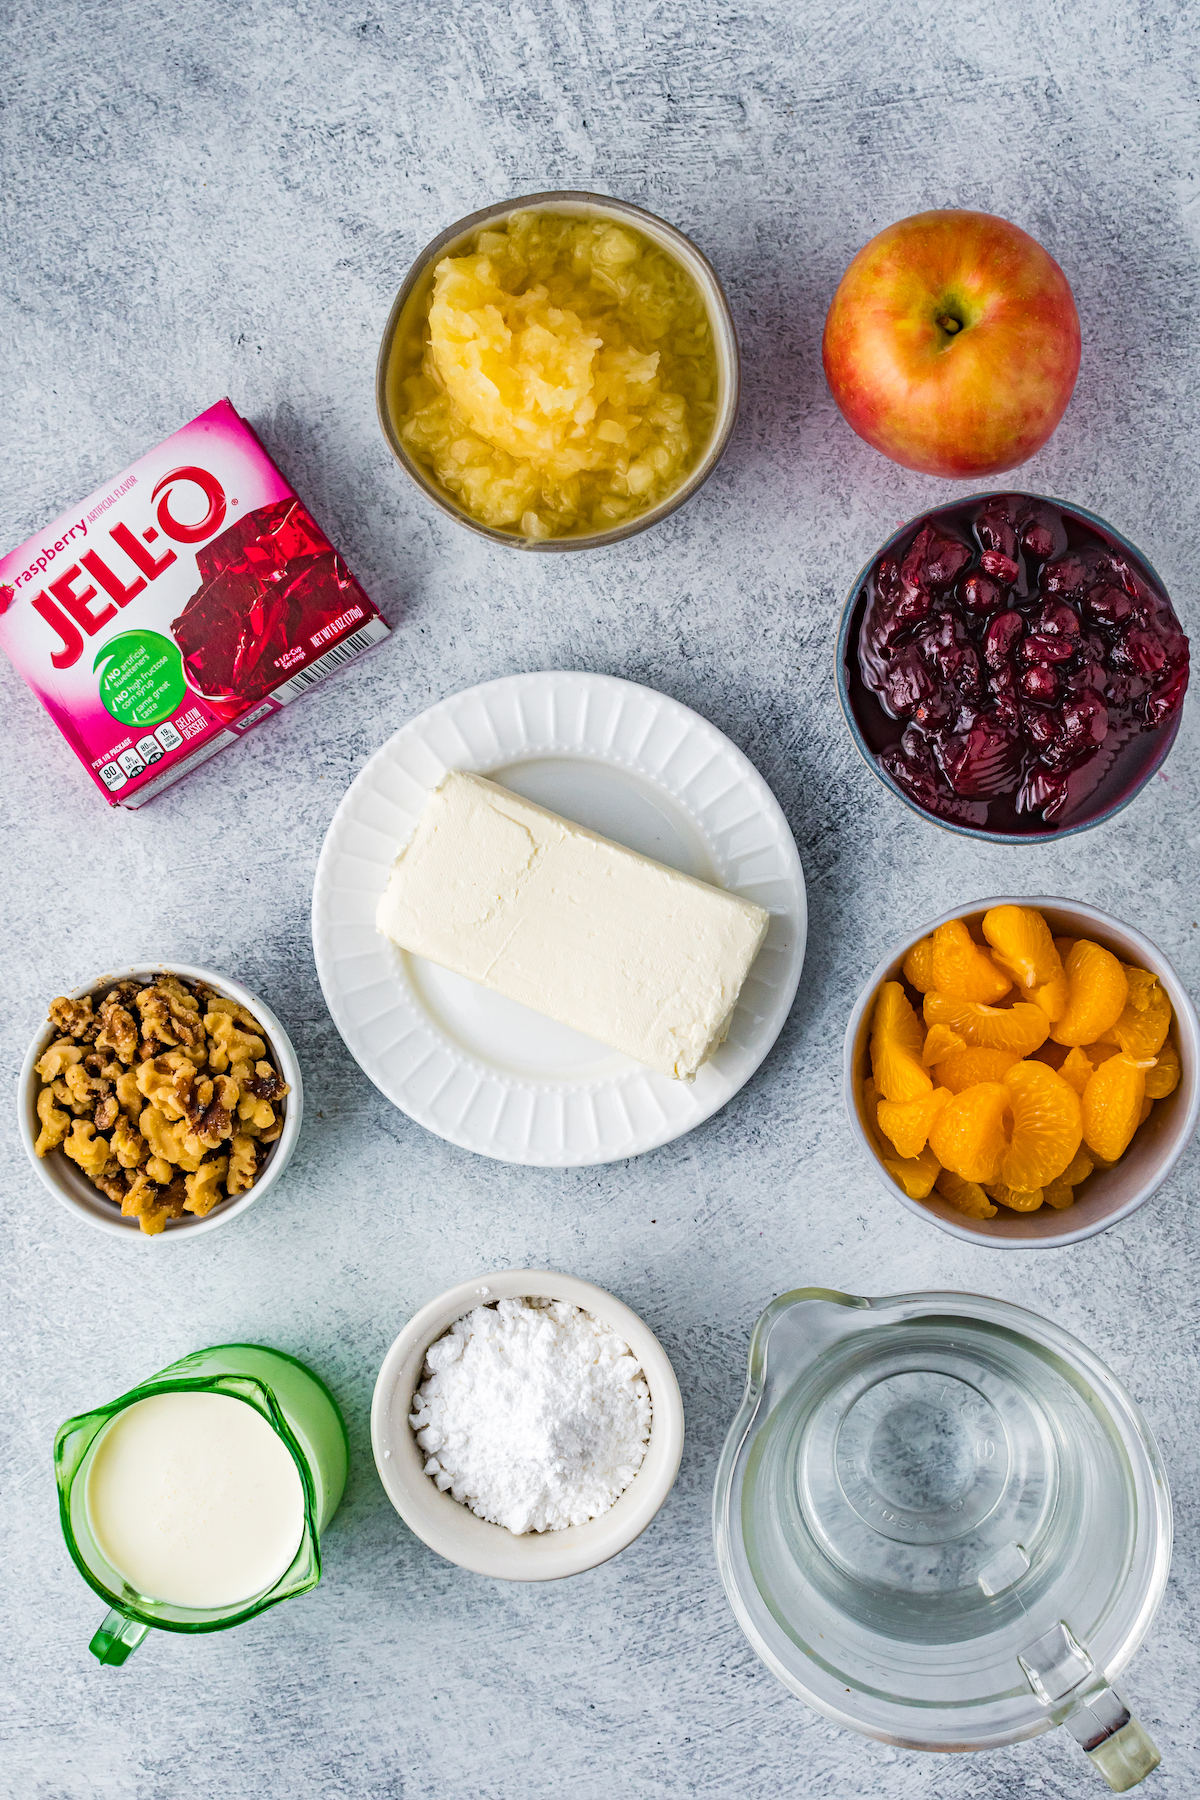 Clockwise from top: Crushed pineapple in juice, an apple, a bowl of cranberry sauce, a dish of mandarin segments, a measuring cup of water, a ramekin of powdered sugar, a container of cream, and a dish of chopped nuts. Center: a block of cream cheese.